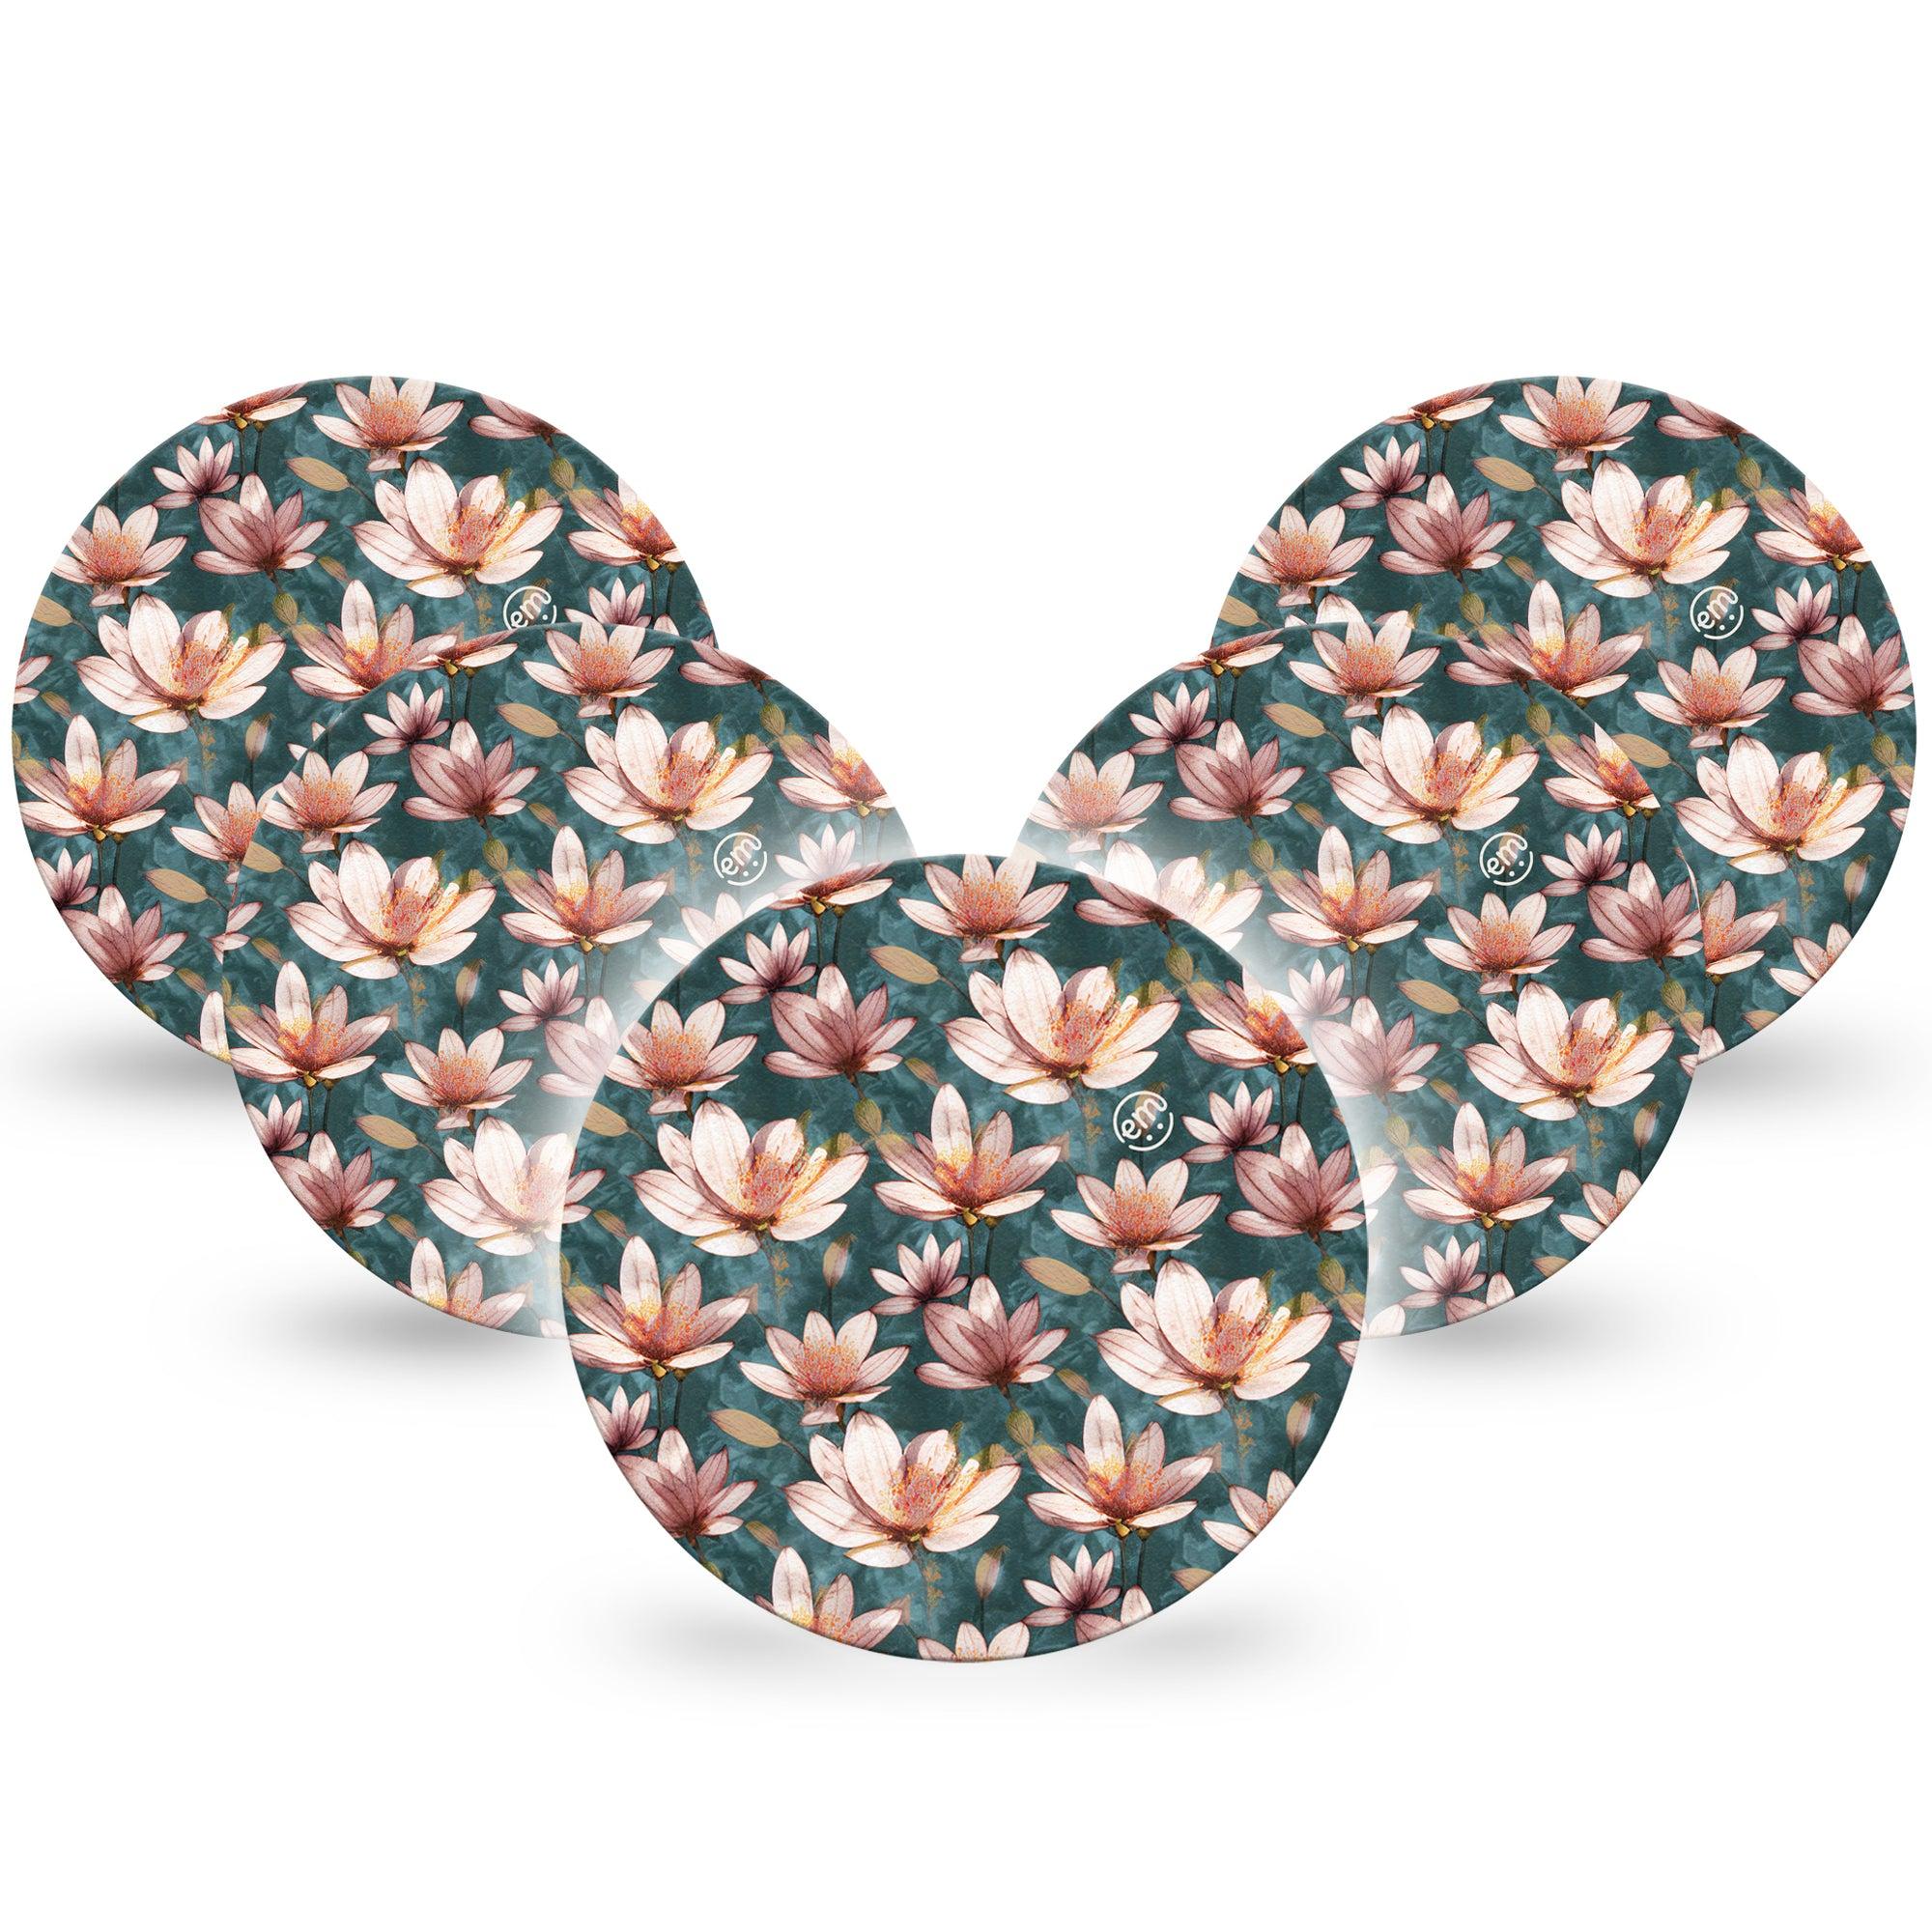 ExpressionMed Magnolia Libre 2 Overpatch, 5-Pack, Sweet-Smelling Florals Inspired, CGM Plaster Tape Design